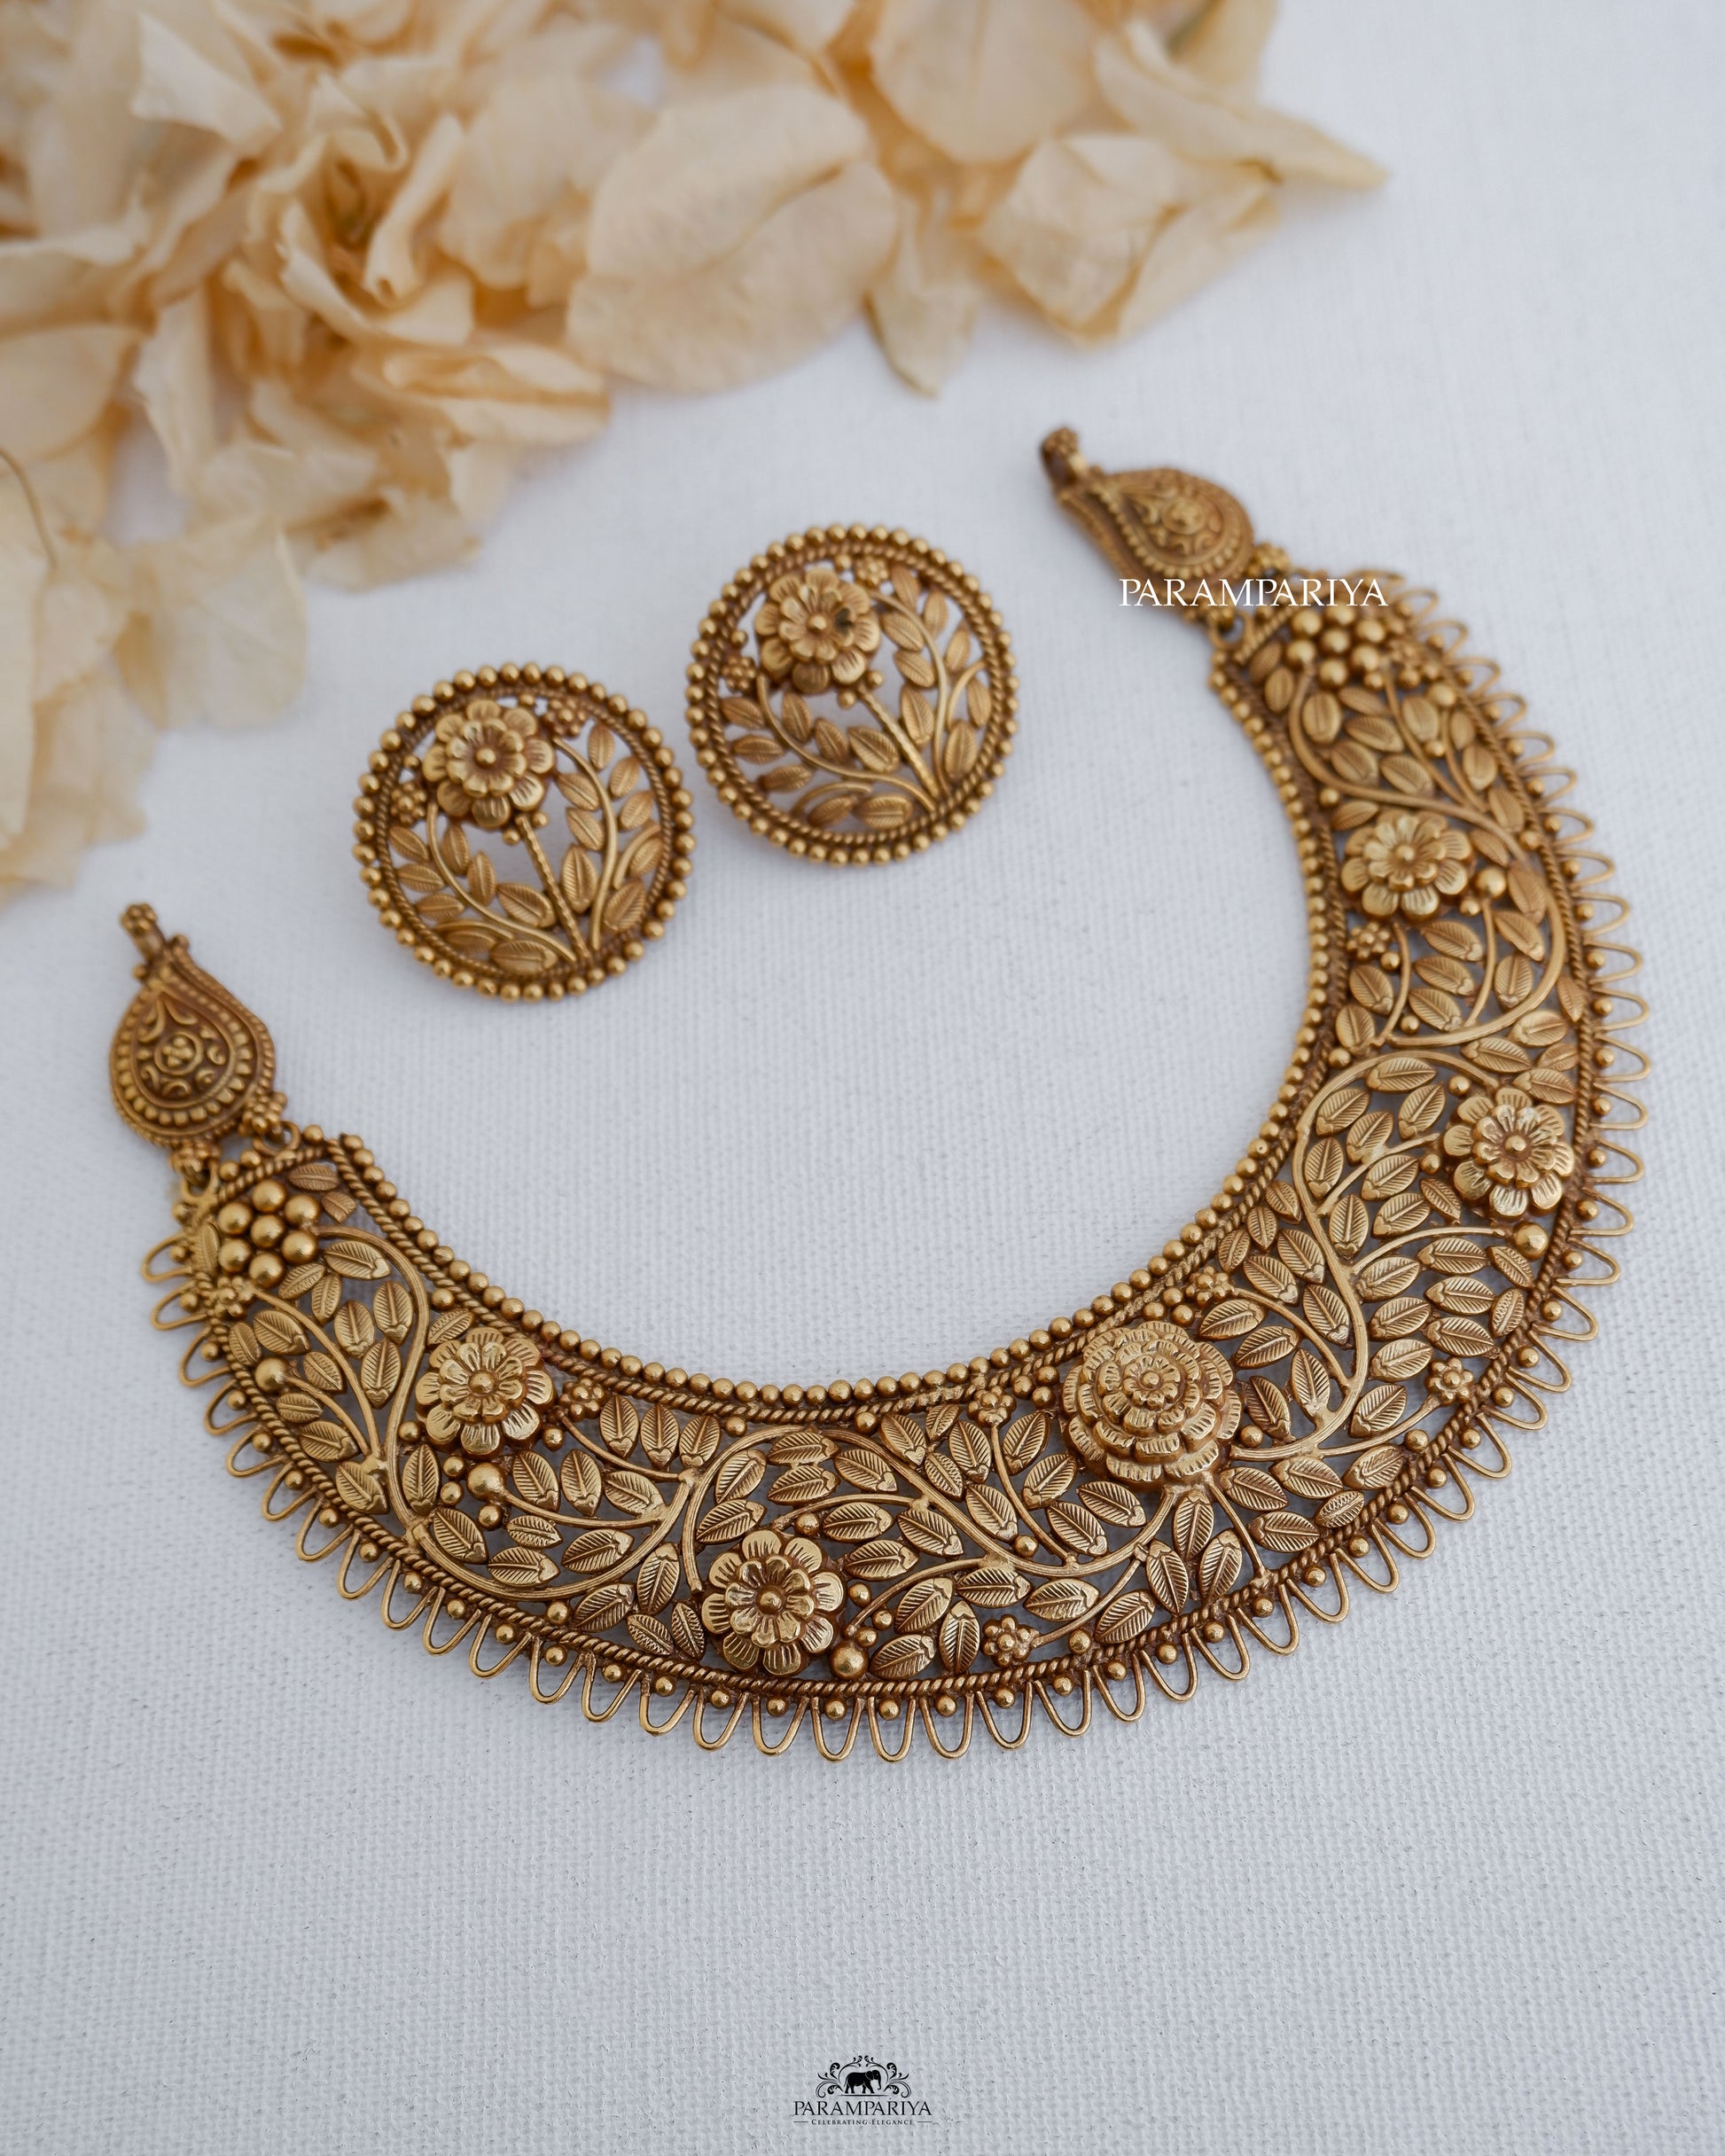 This necklace set is made of pure silver and features a micron gold plated design with delicate floral patterns. Accompanied by matching earrings, it creates a minimal yet elegant appearance.